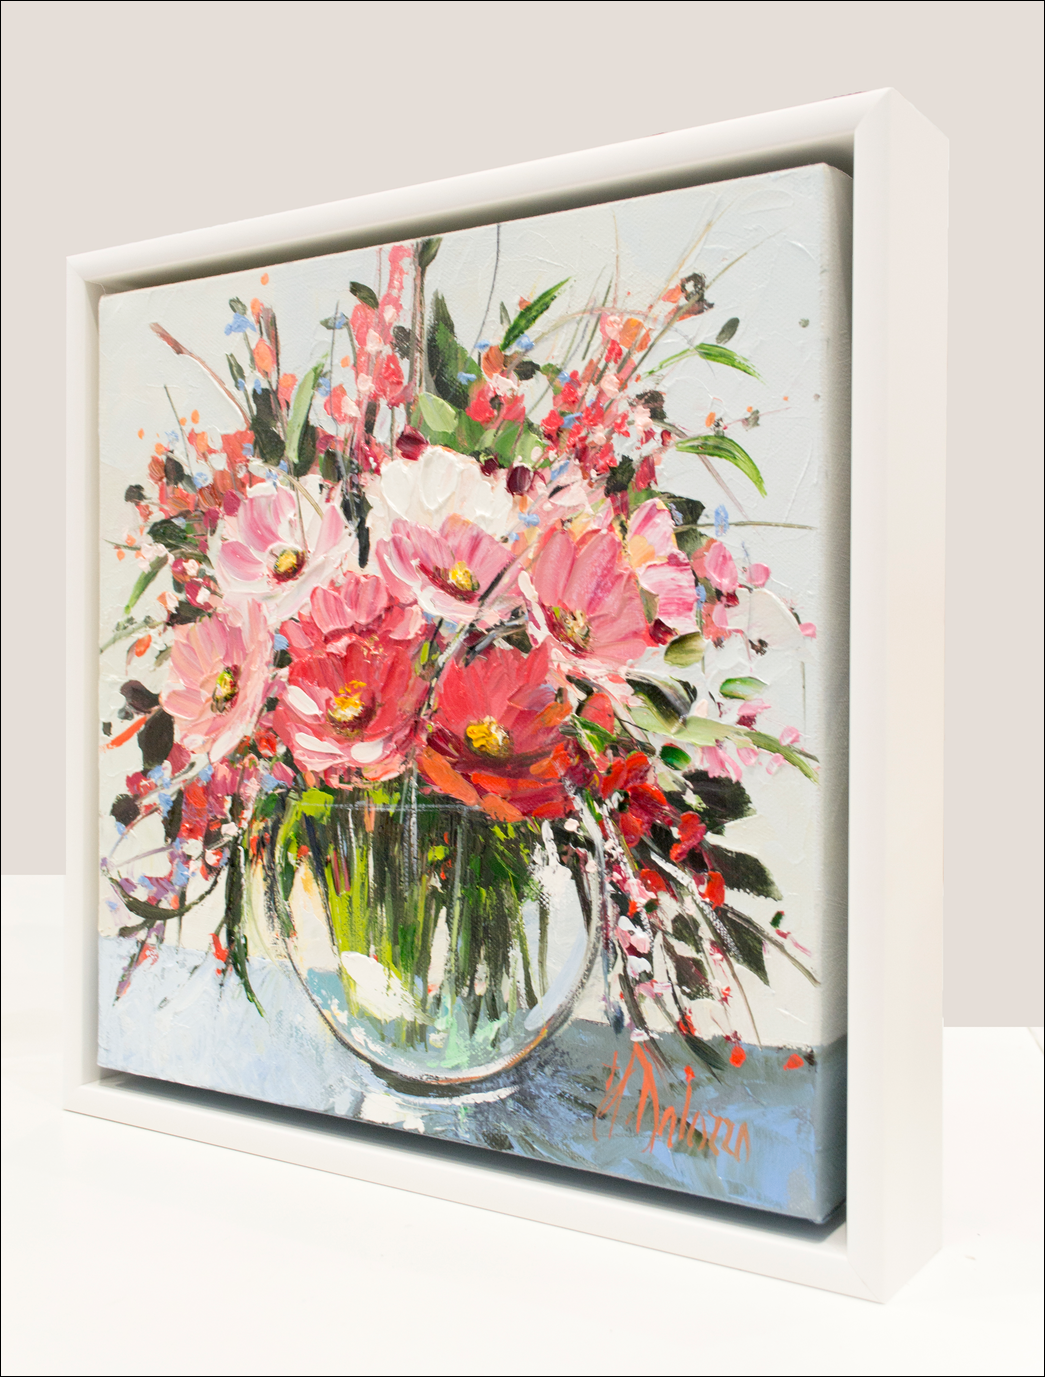 Framed Side View Of Still Life Painting "Fresh Flowers" By Judith Dalozzo